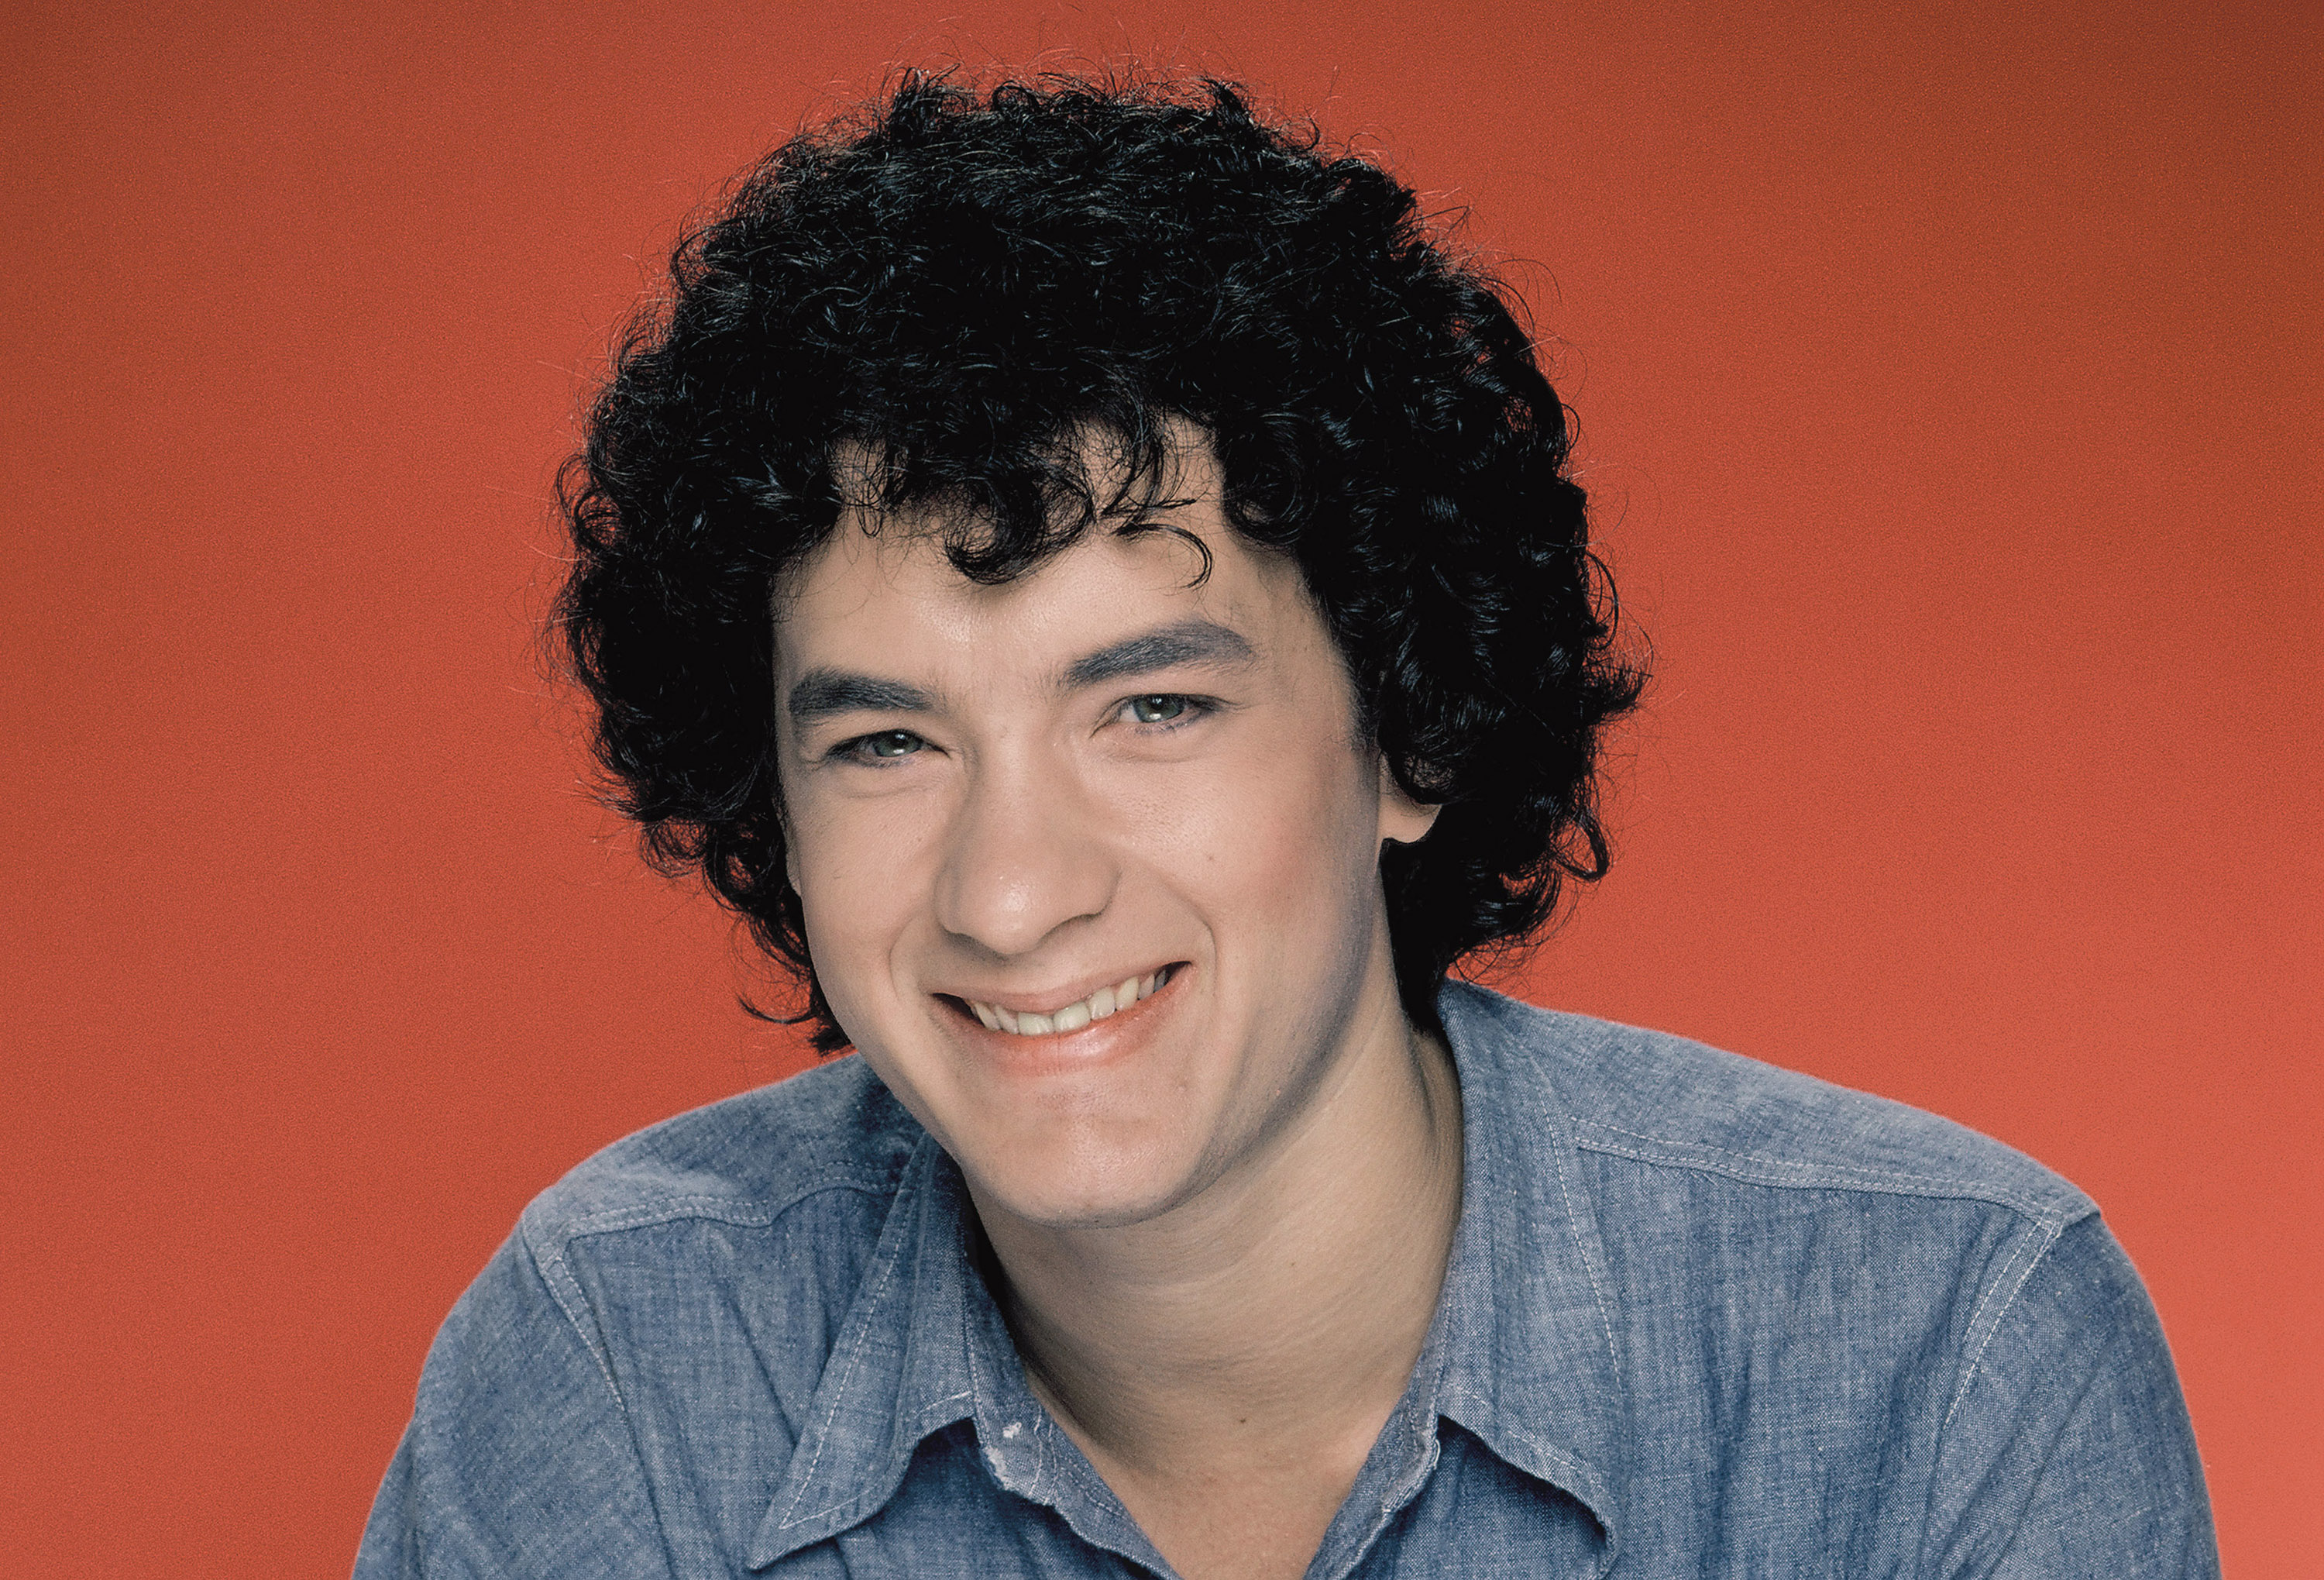 Tom Hanks in a publicity photo for "Bosom Buddies" on November 27, 1980. | Source: Getty Images